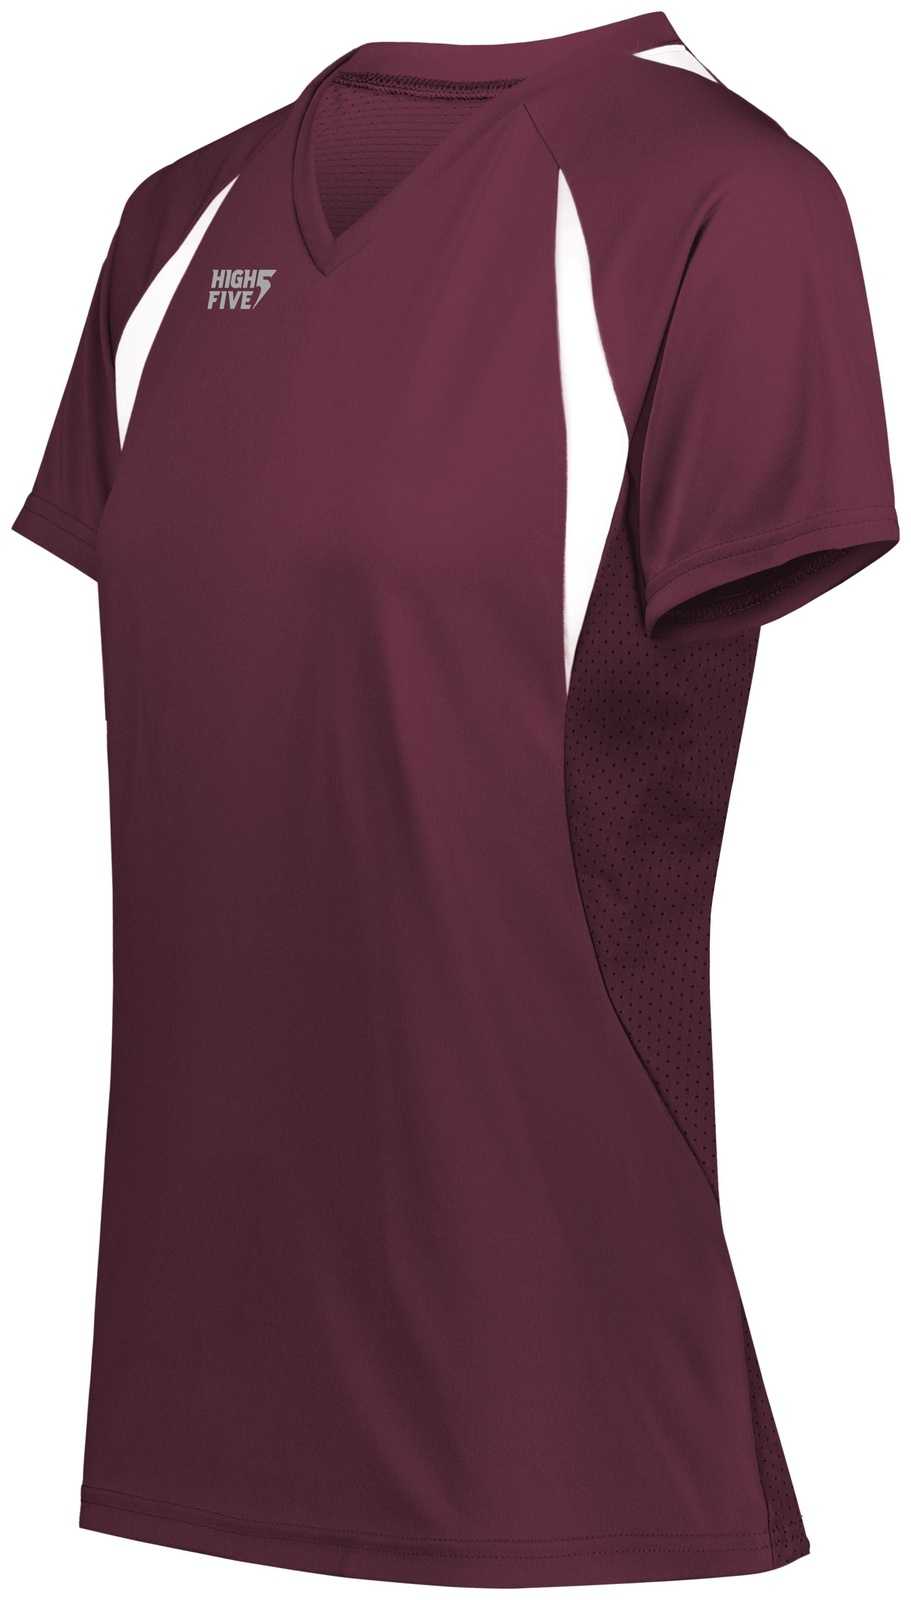 High Five 342232 Ladies Color Cross Jersey - Maroon White - HIT a Double